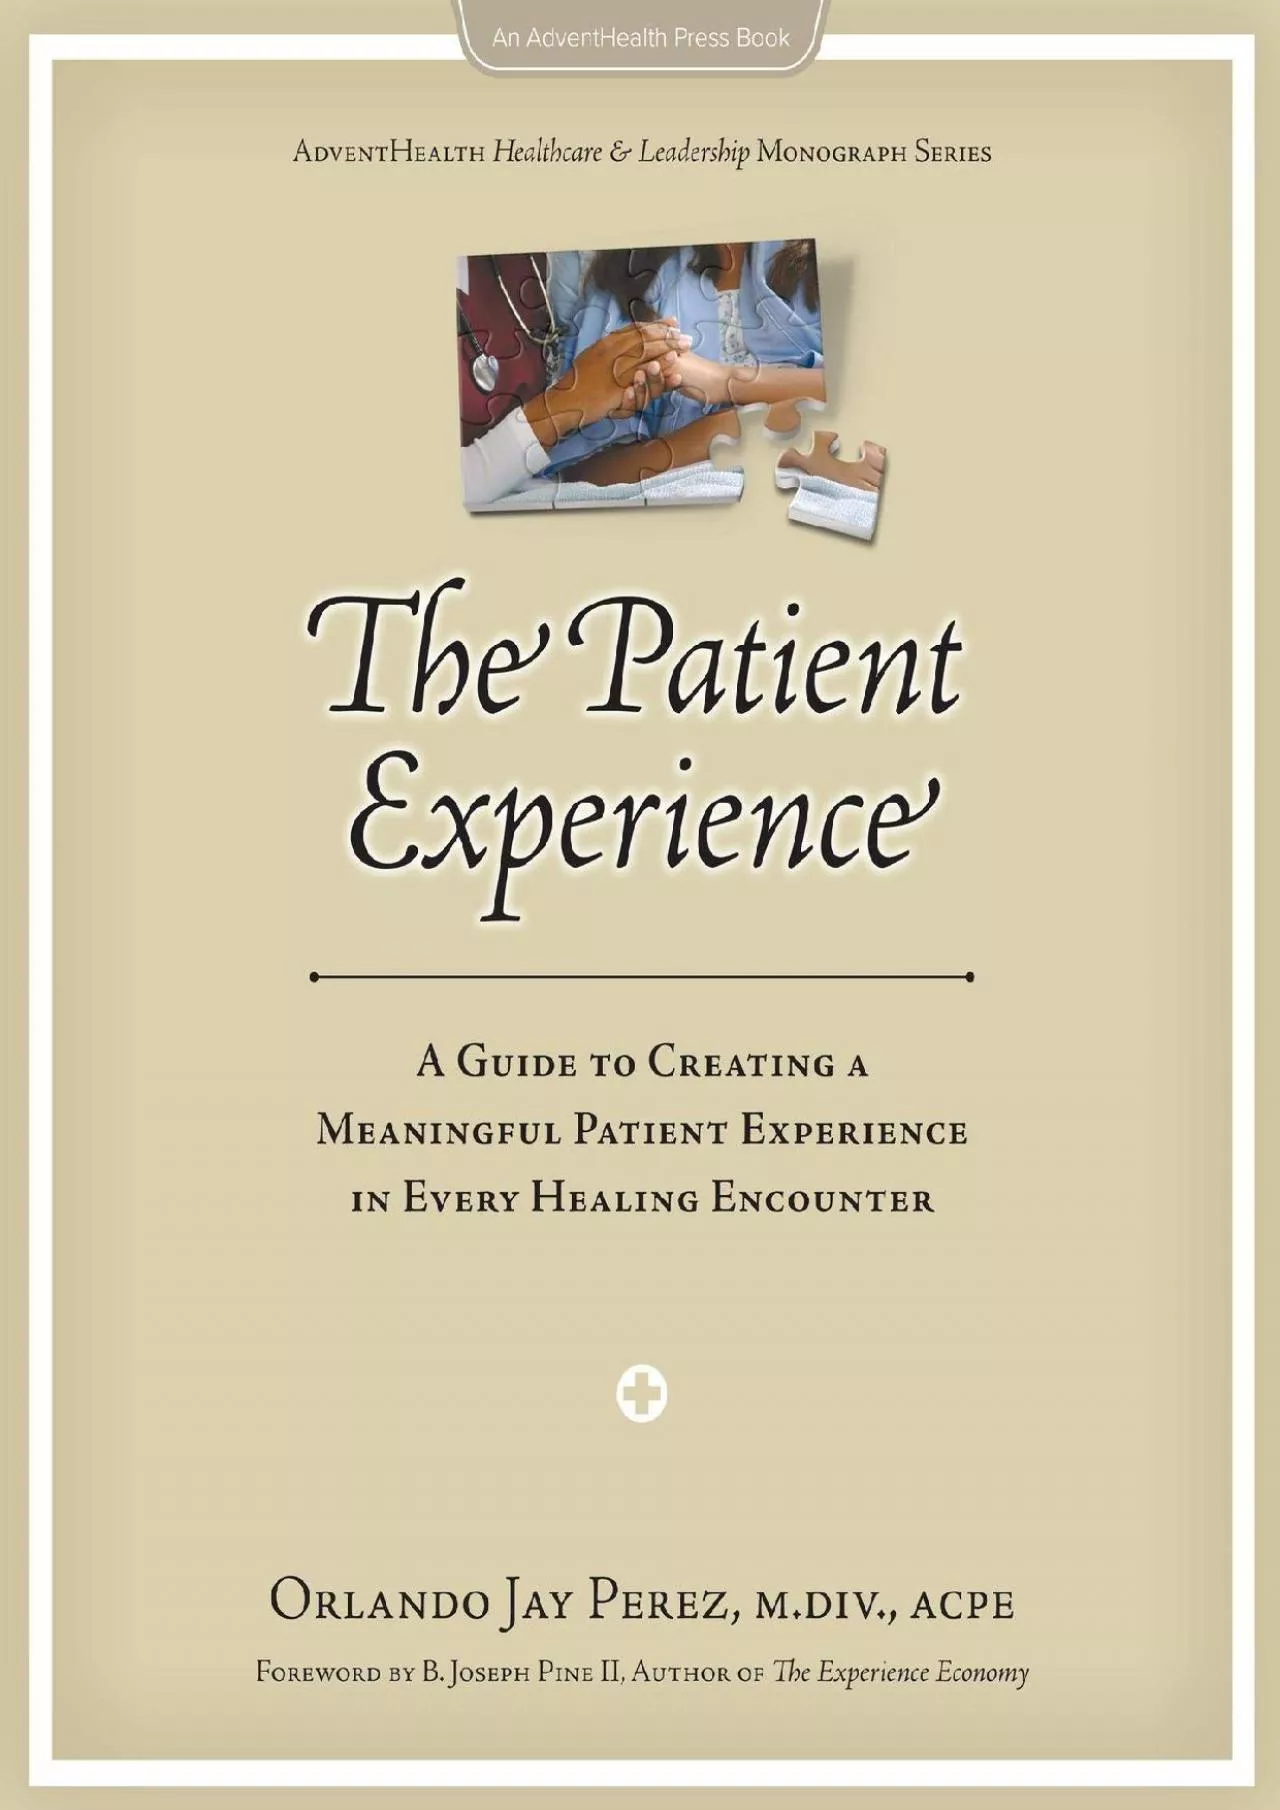 (DOWNLOAD)-The Patient Experience: A Guide to Creating a Meaningful Patient Experience